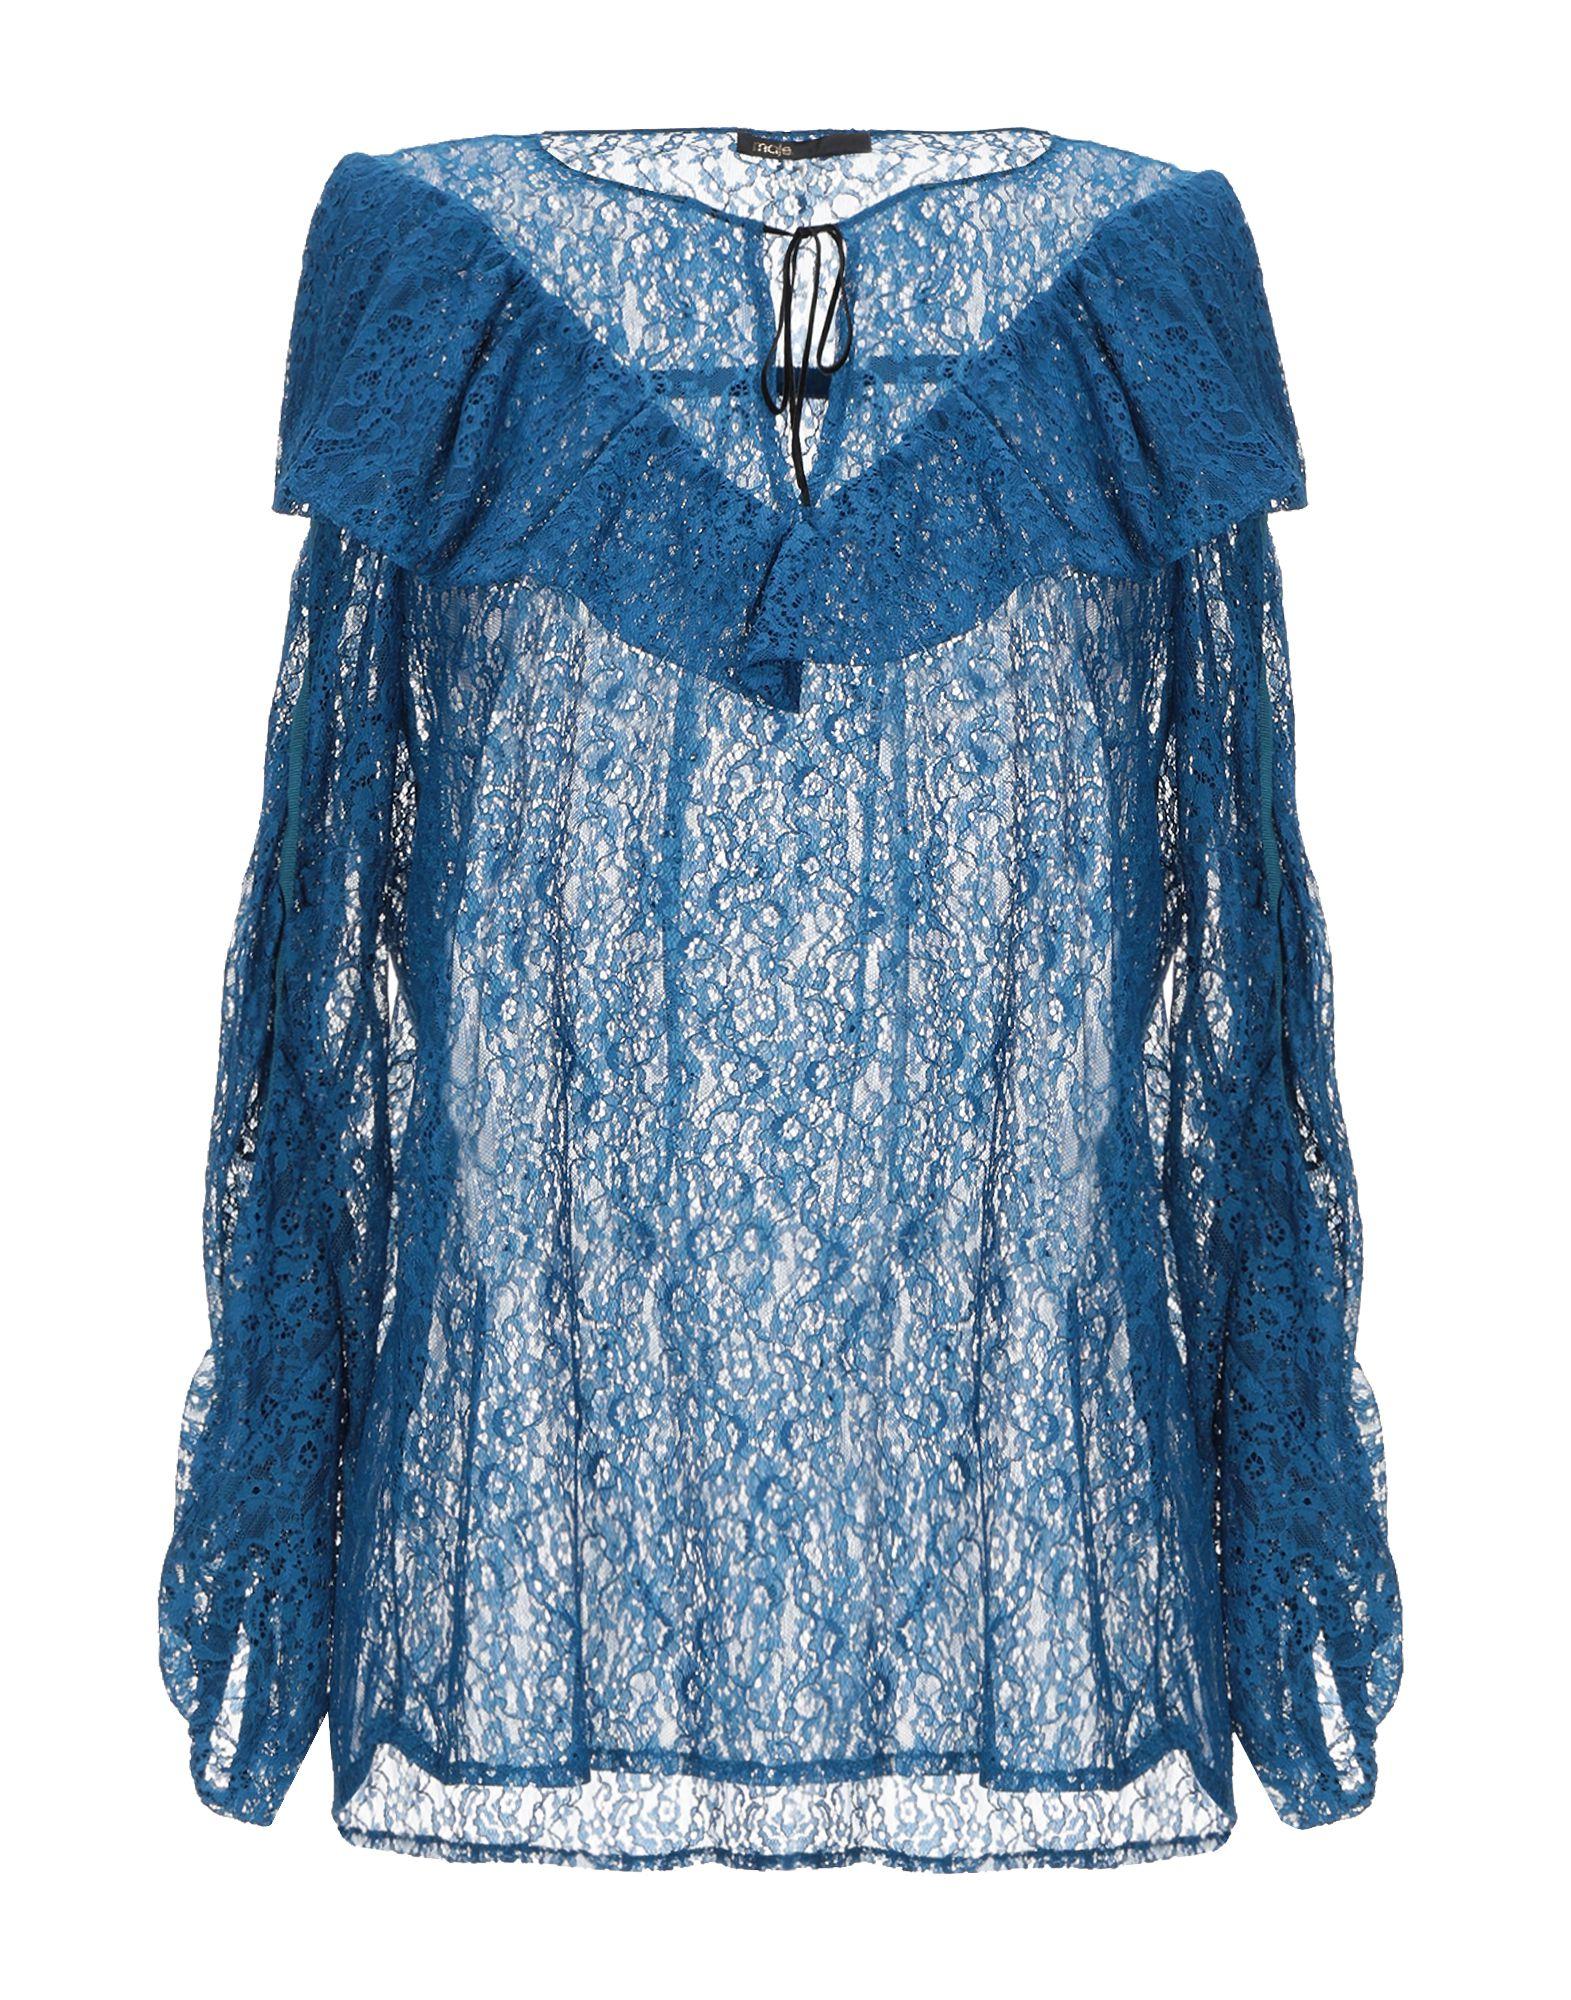 Maje Lace Blouse in Blue - Lyst